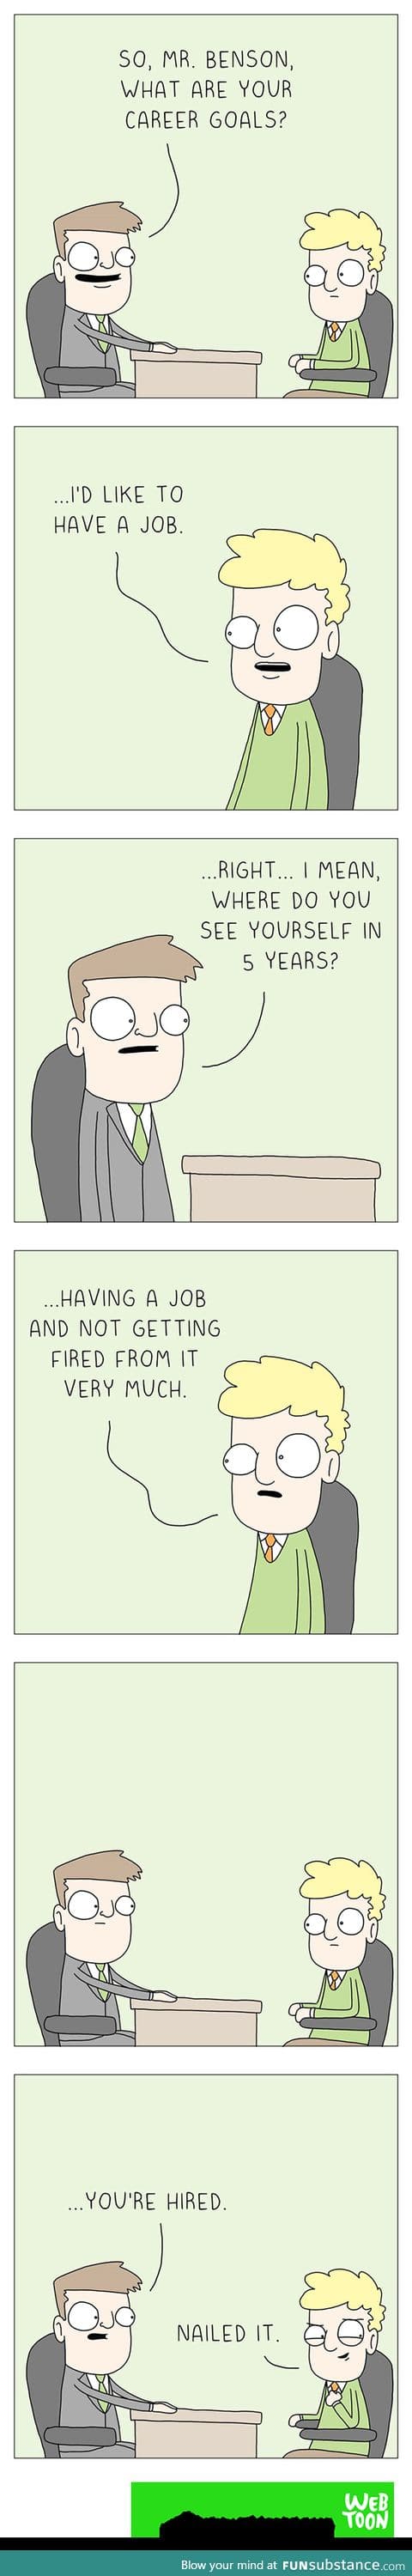 How to get a job